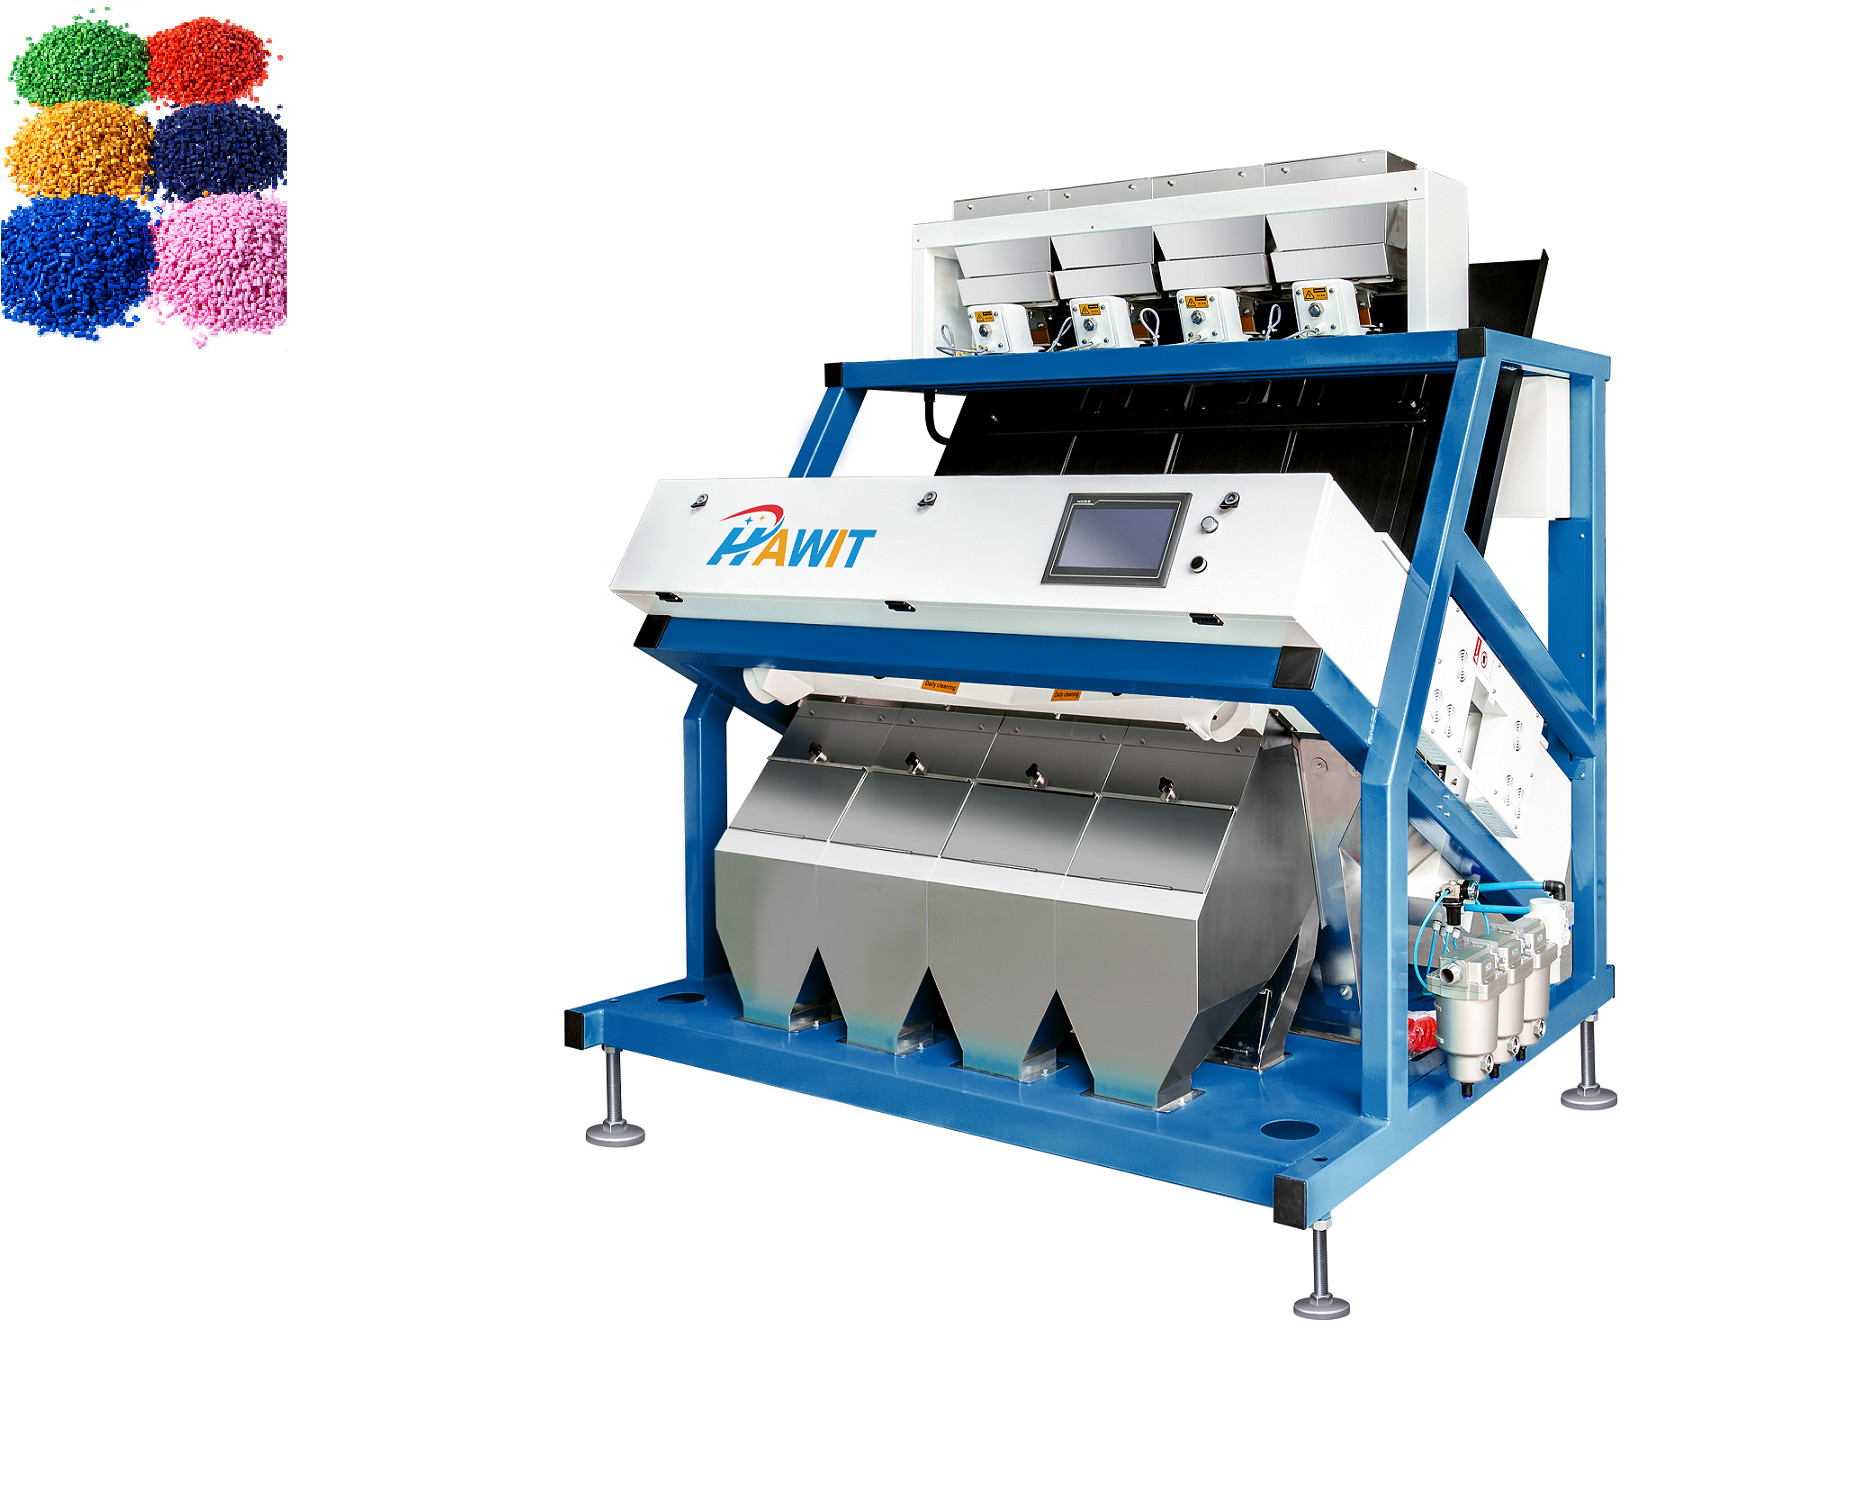 High Accuracy Plastic Color Sorter Multitasking Function 5400 Pixel CCD